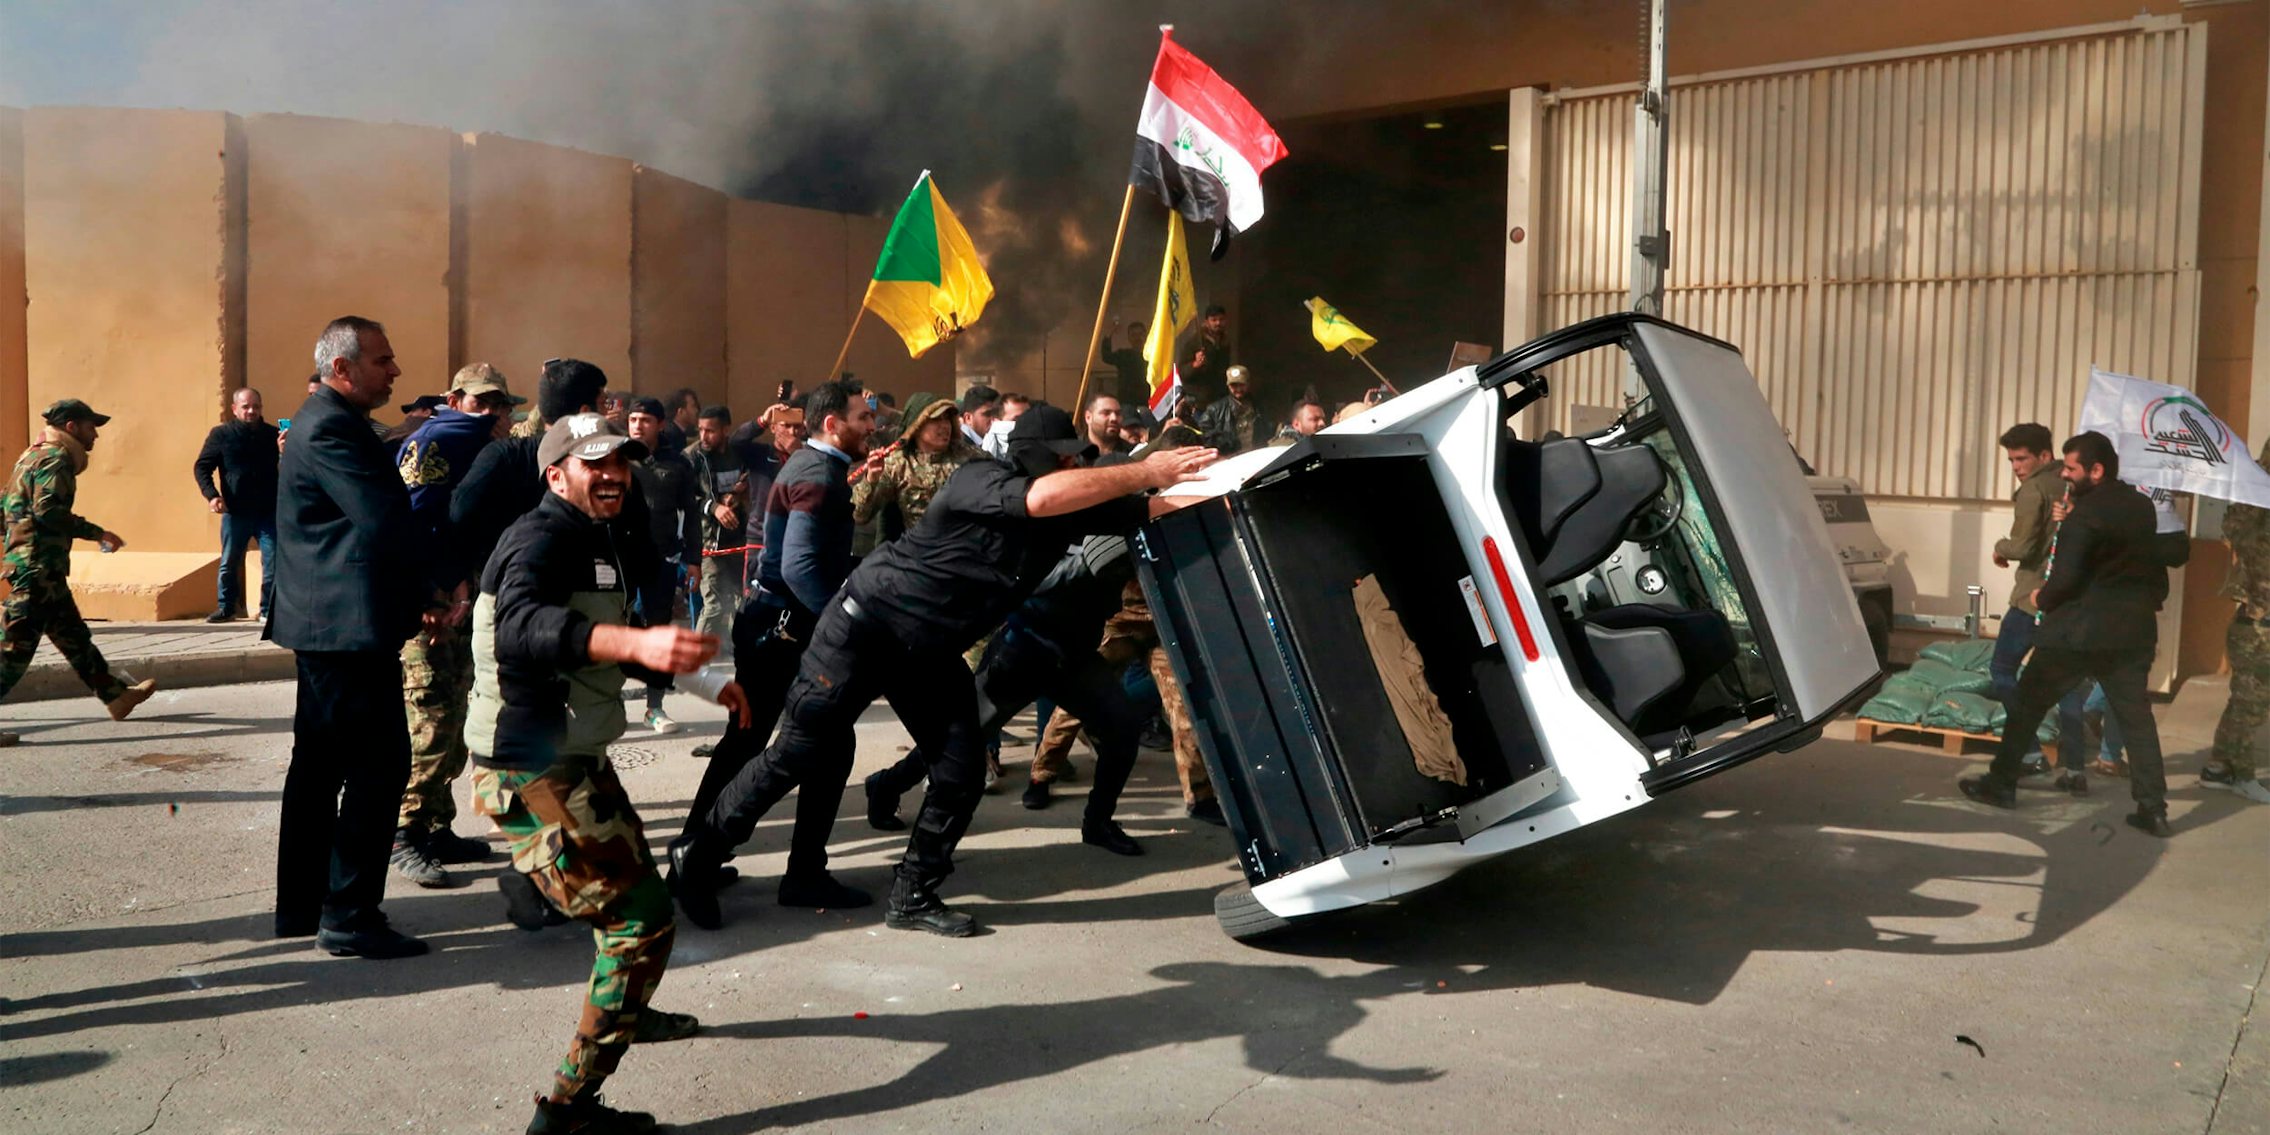 Protesters damage property inside the U.S. embassy compound, in Baghdad, Iraq